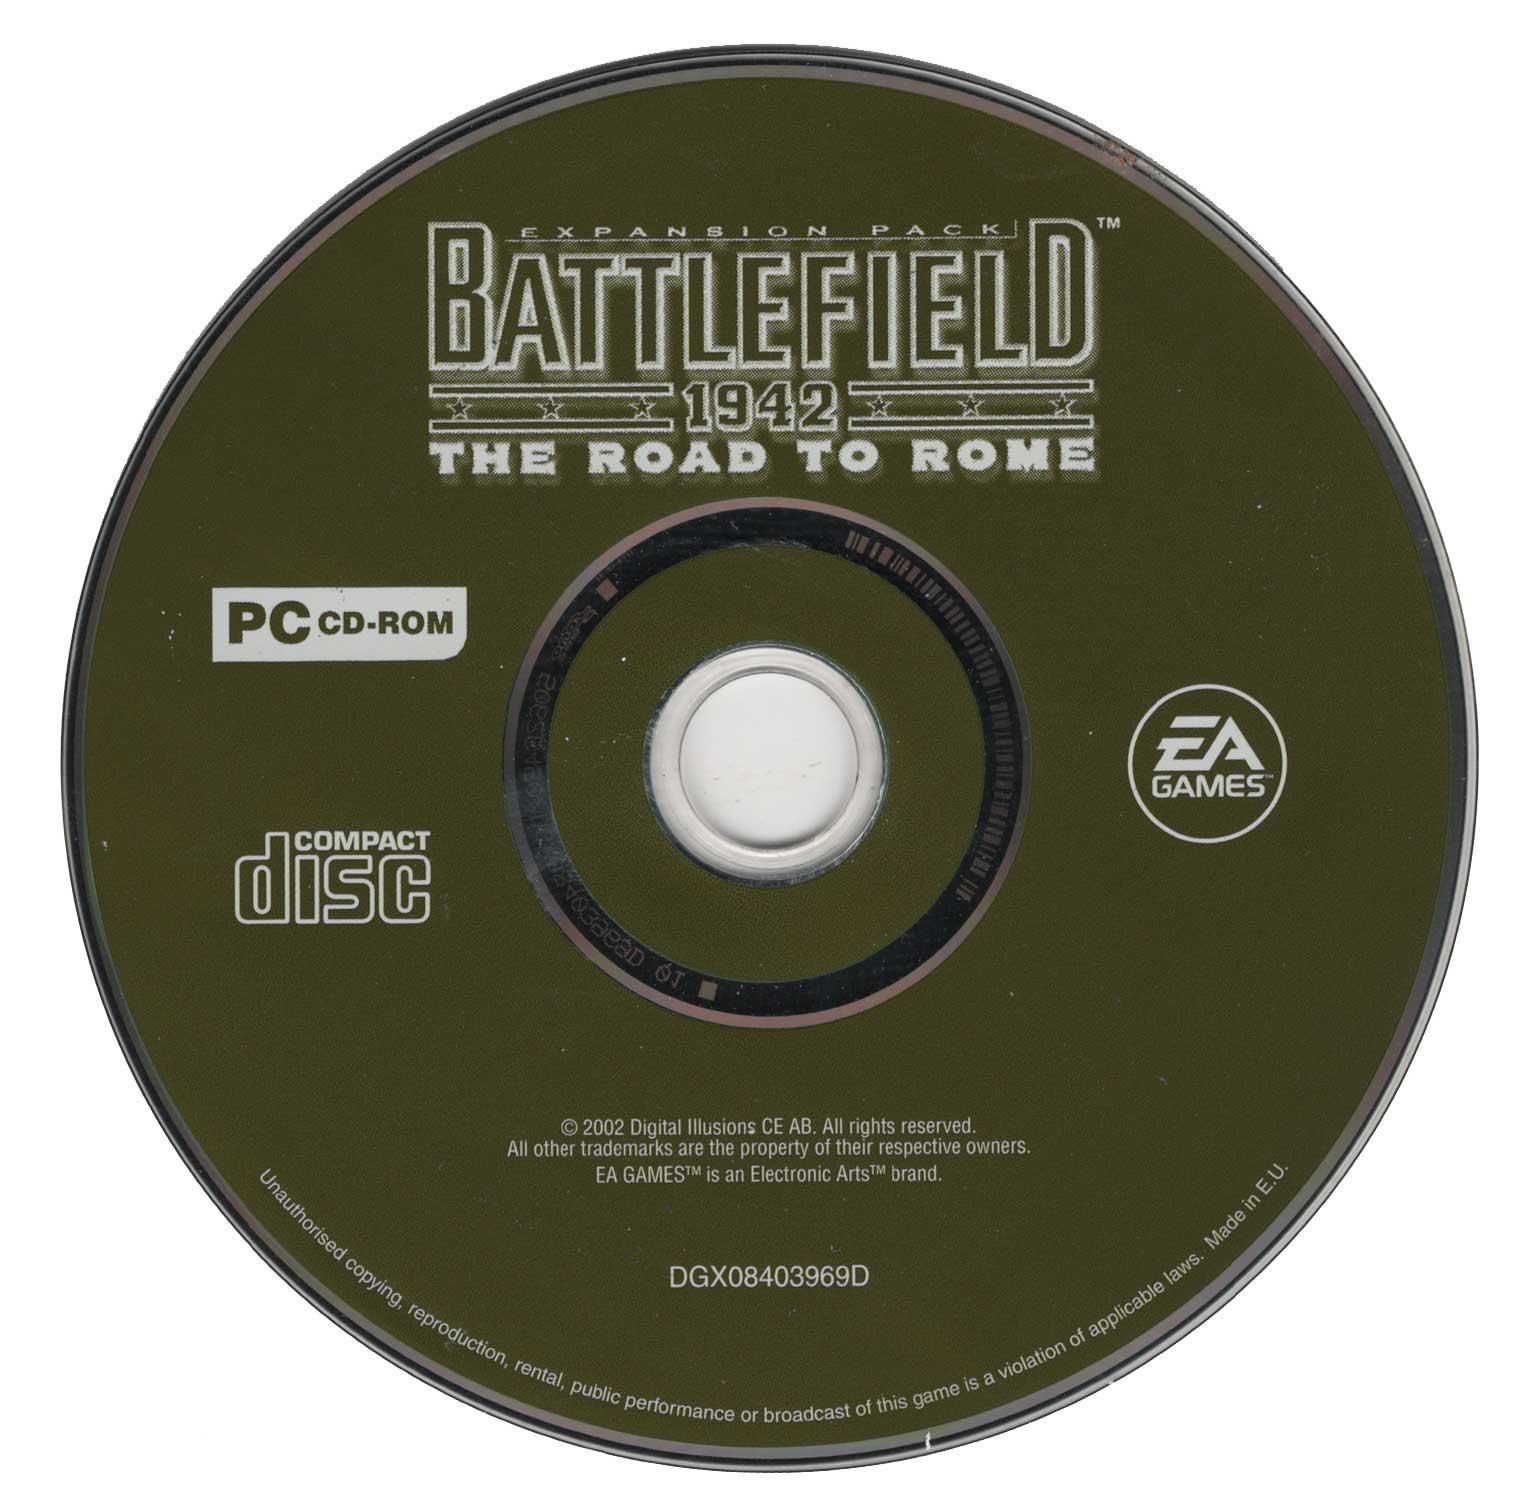 Expansion Pack Battlefield 1942 Road To Rome - Classic Windows PC Game